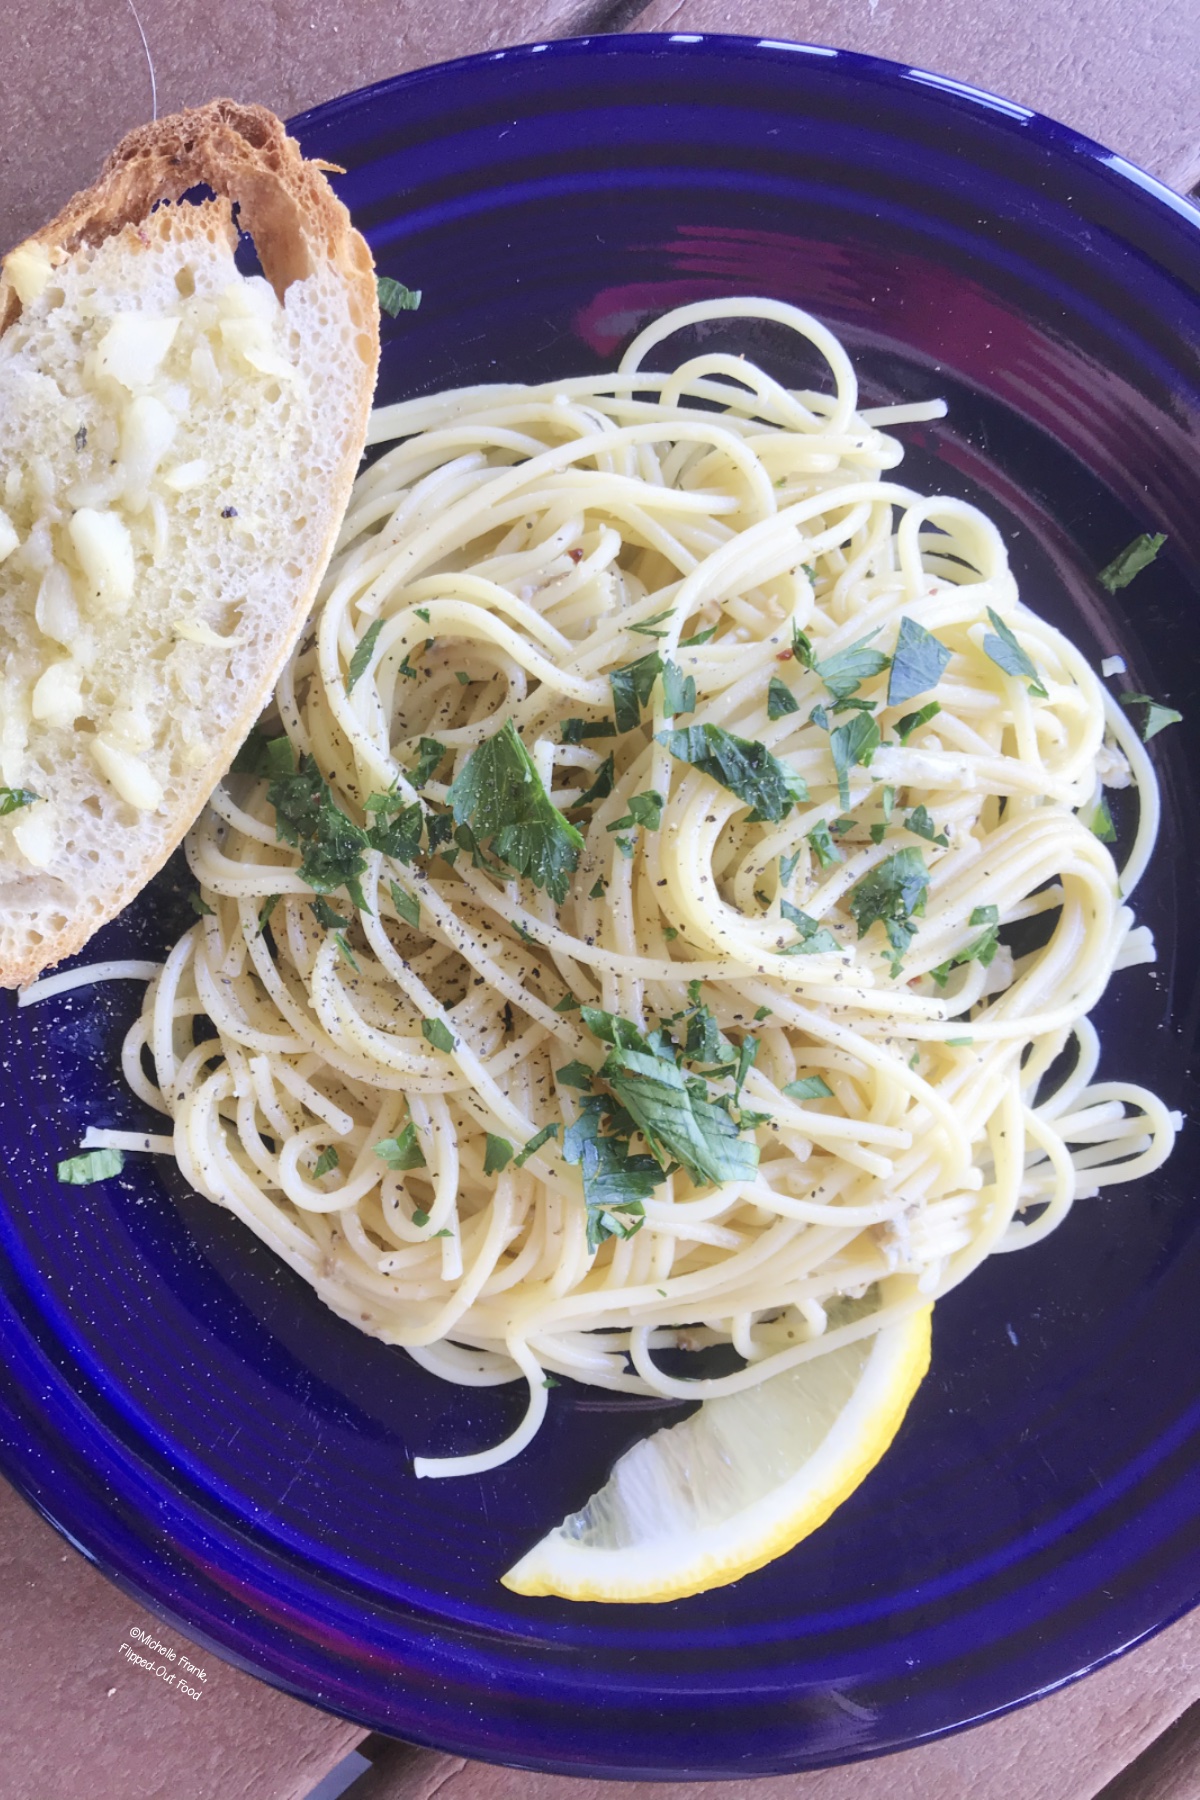 A serving of Pantry Linguine with Clam Sauce, garnished with parsley, on a blue plate next to a slice of toasted bread that has been smeared with roasted garlic.